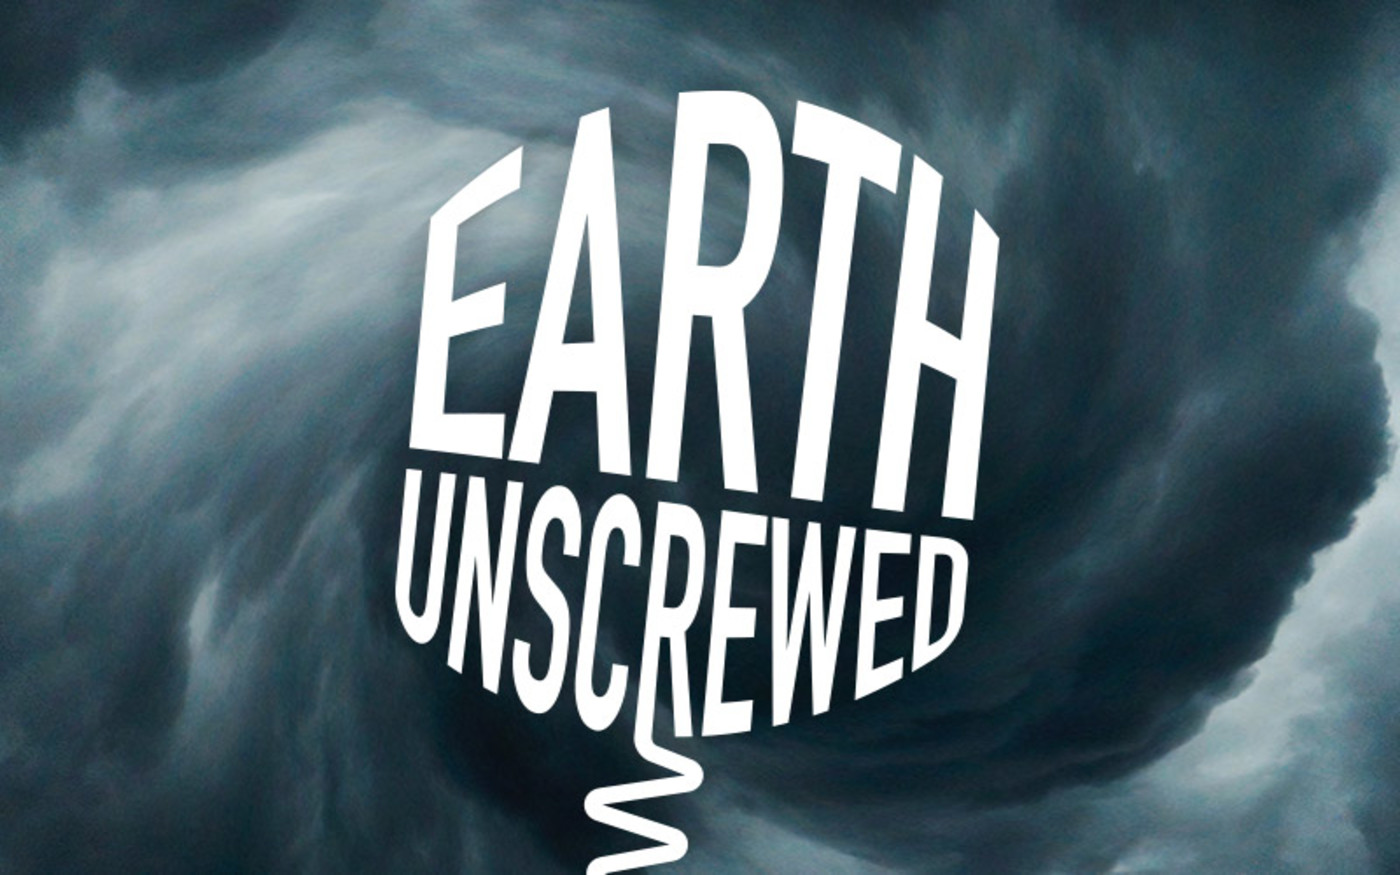 Earth Unscrewed graphic